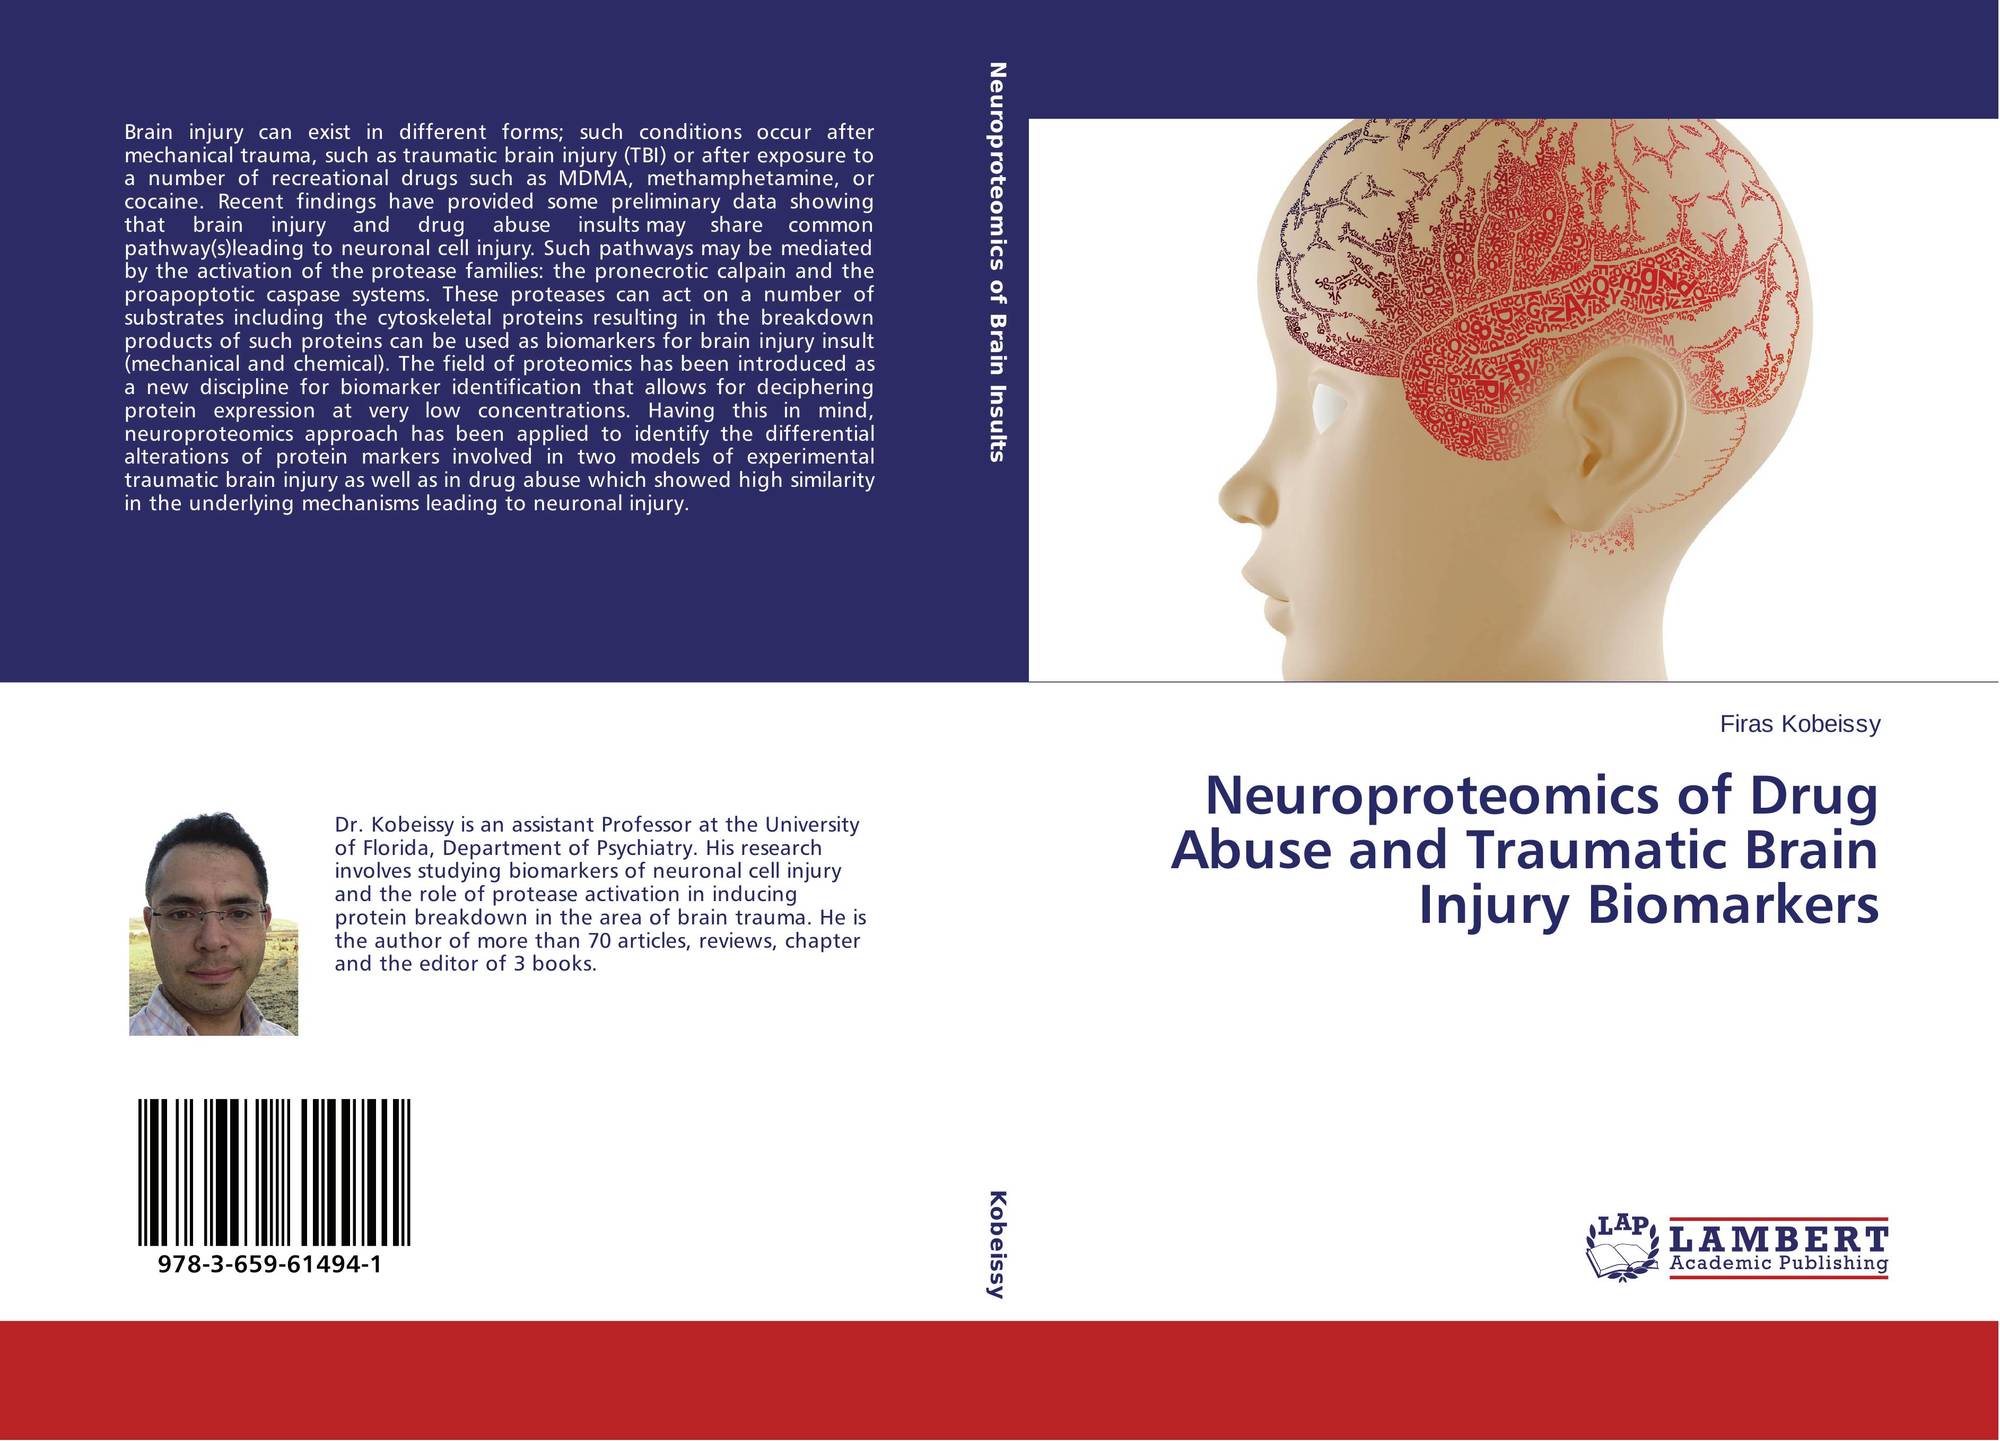 Нейро книги. Aquired Brain injury. Best book on Neuropharmacology. Vol. 3 no. 2 (2024): research Journal of Trauma and Disability studies. The photo for presentation about Neuropharmacology.